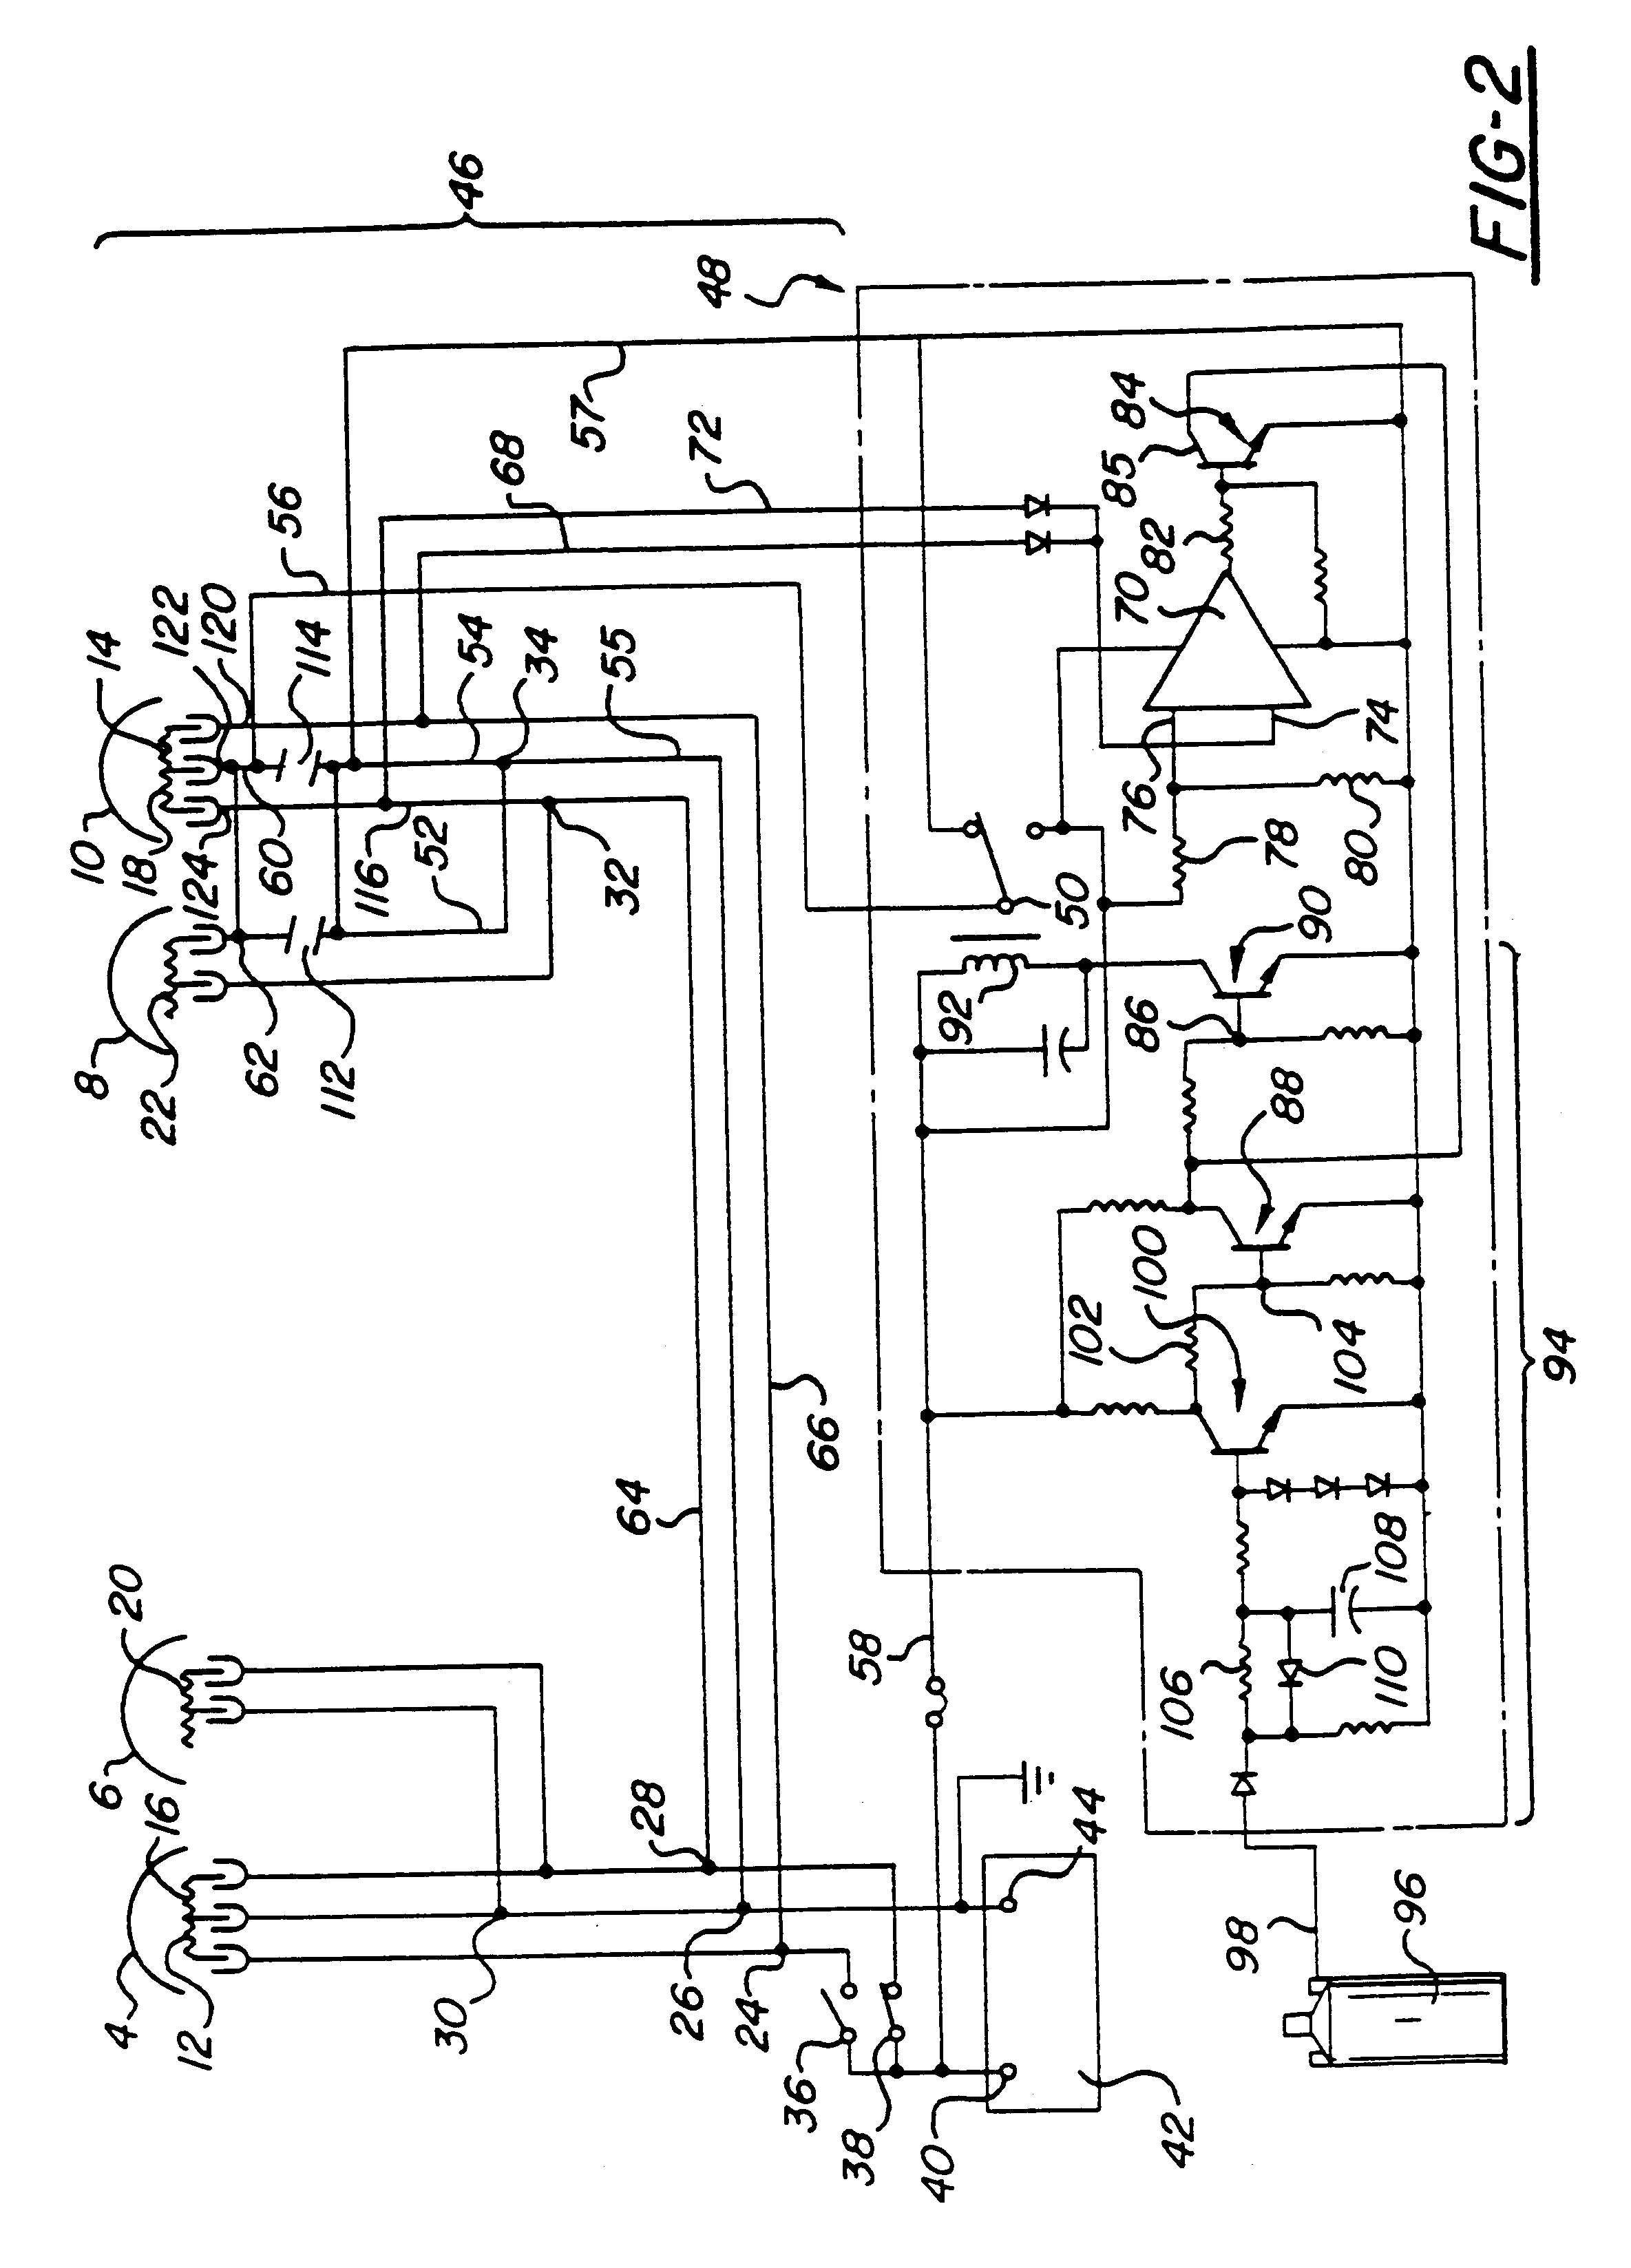 Electrical system for vehicle daytime running lights